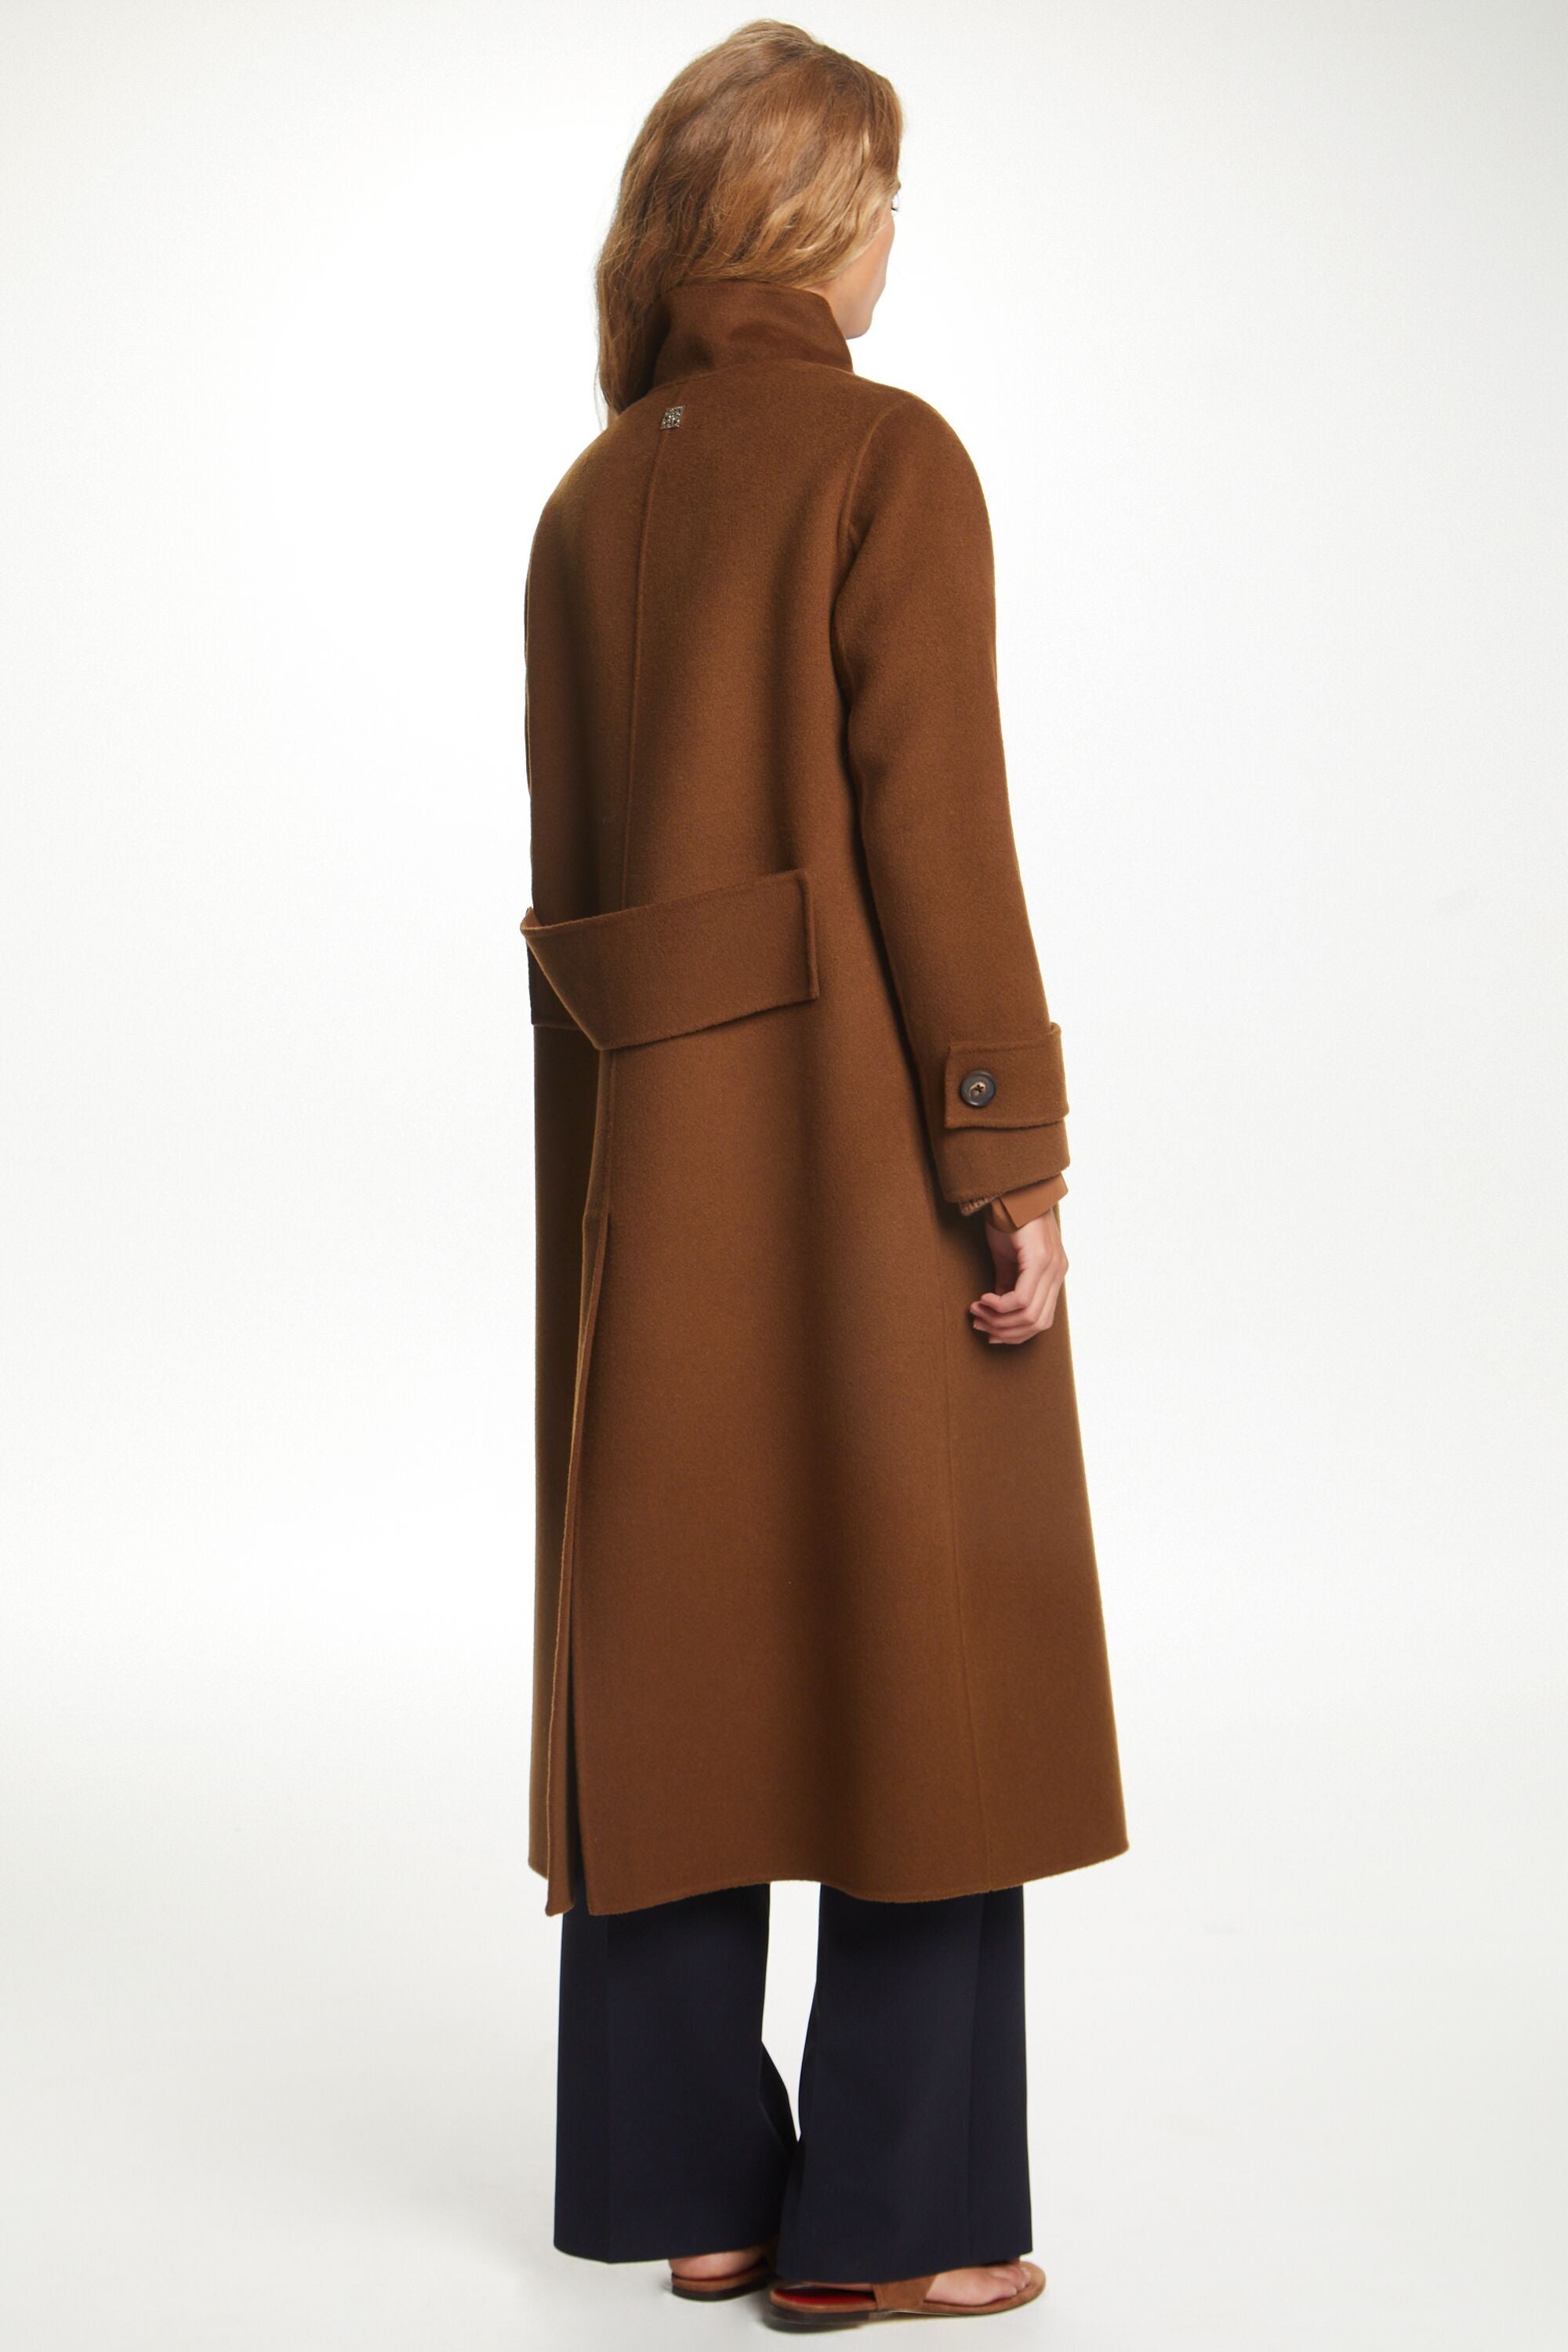 Double-faced wool double-breasted coat dark camel - CH Carolina